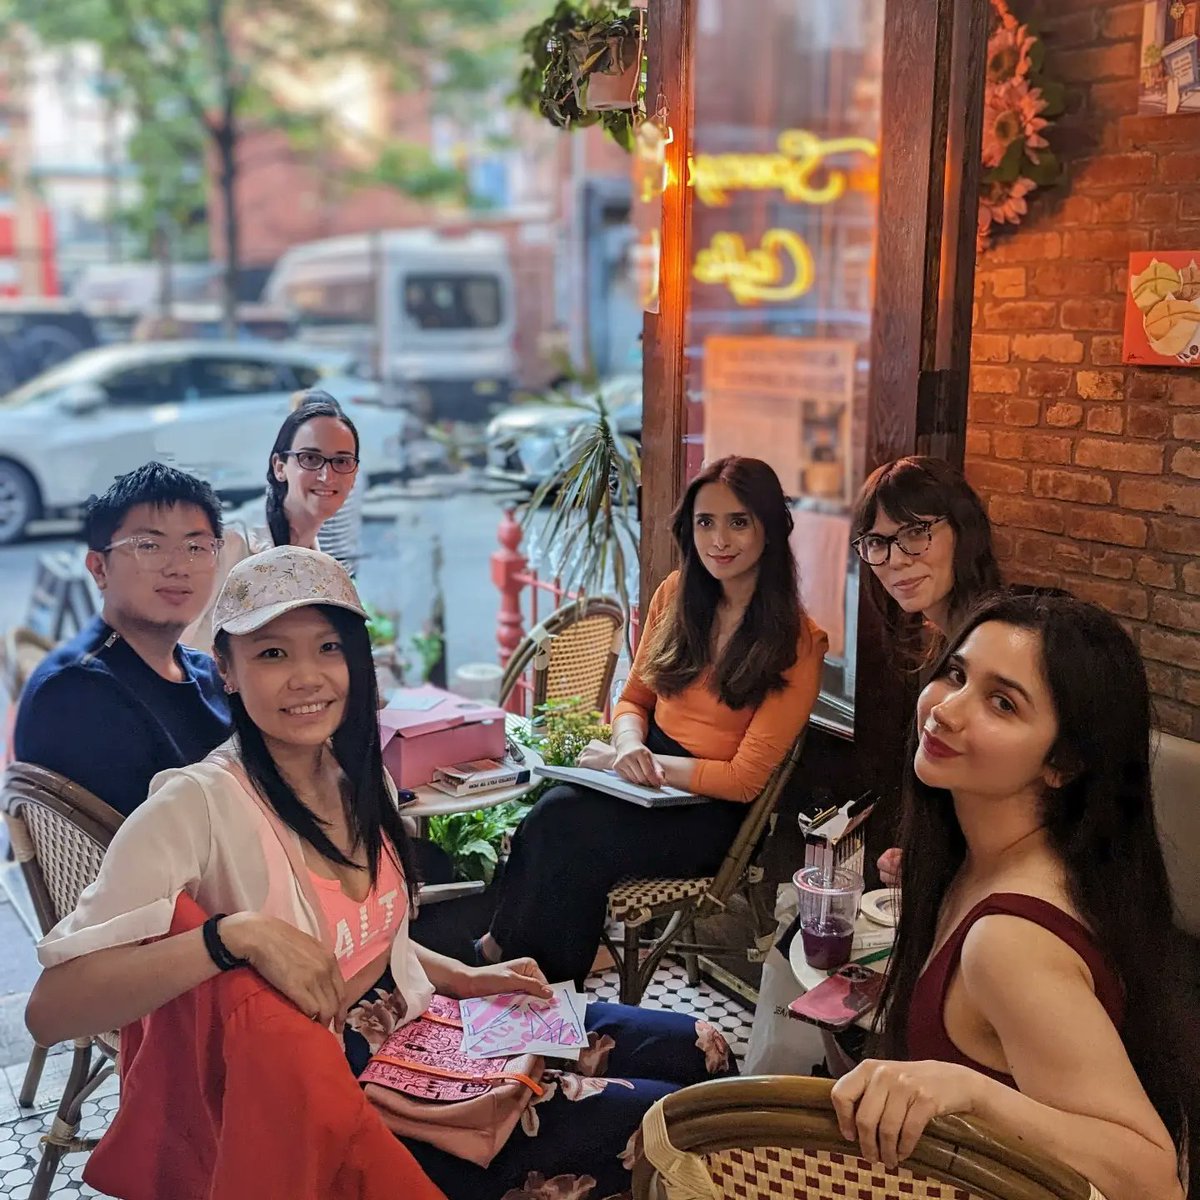 Girl ganggggggg!!!! We took Women in Games NYC out on the town this evening. Ate some cakes, had some lemonade, and made some art 💞🎨🍰

#womeningames #WomenInSTEM #gamedev #NYmakesgames